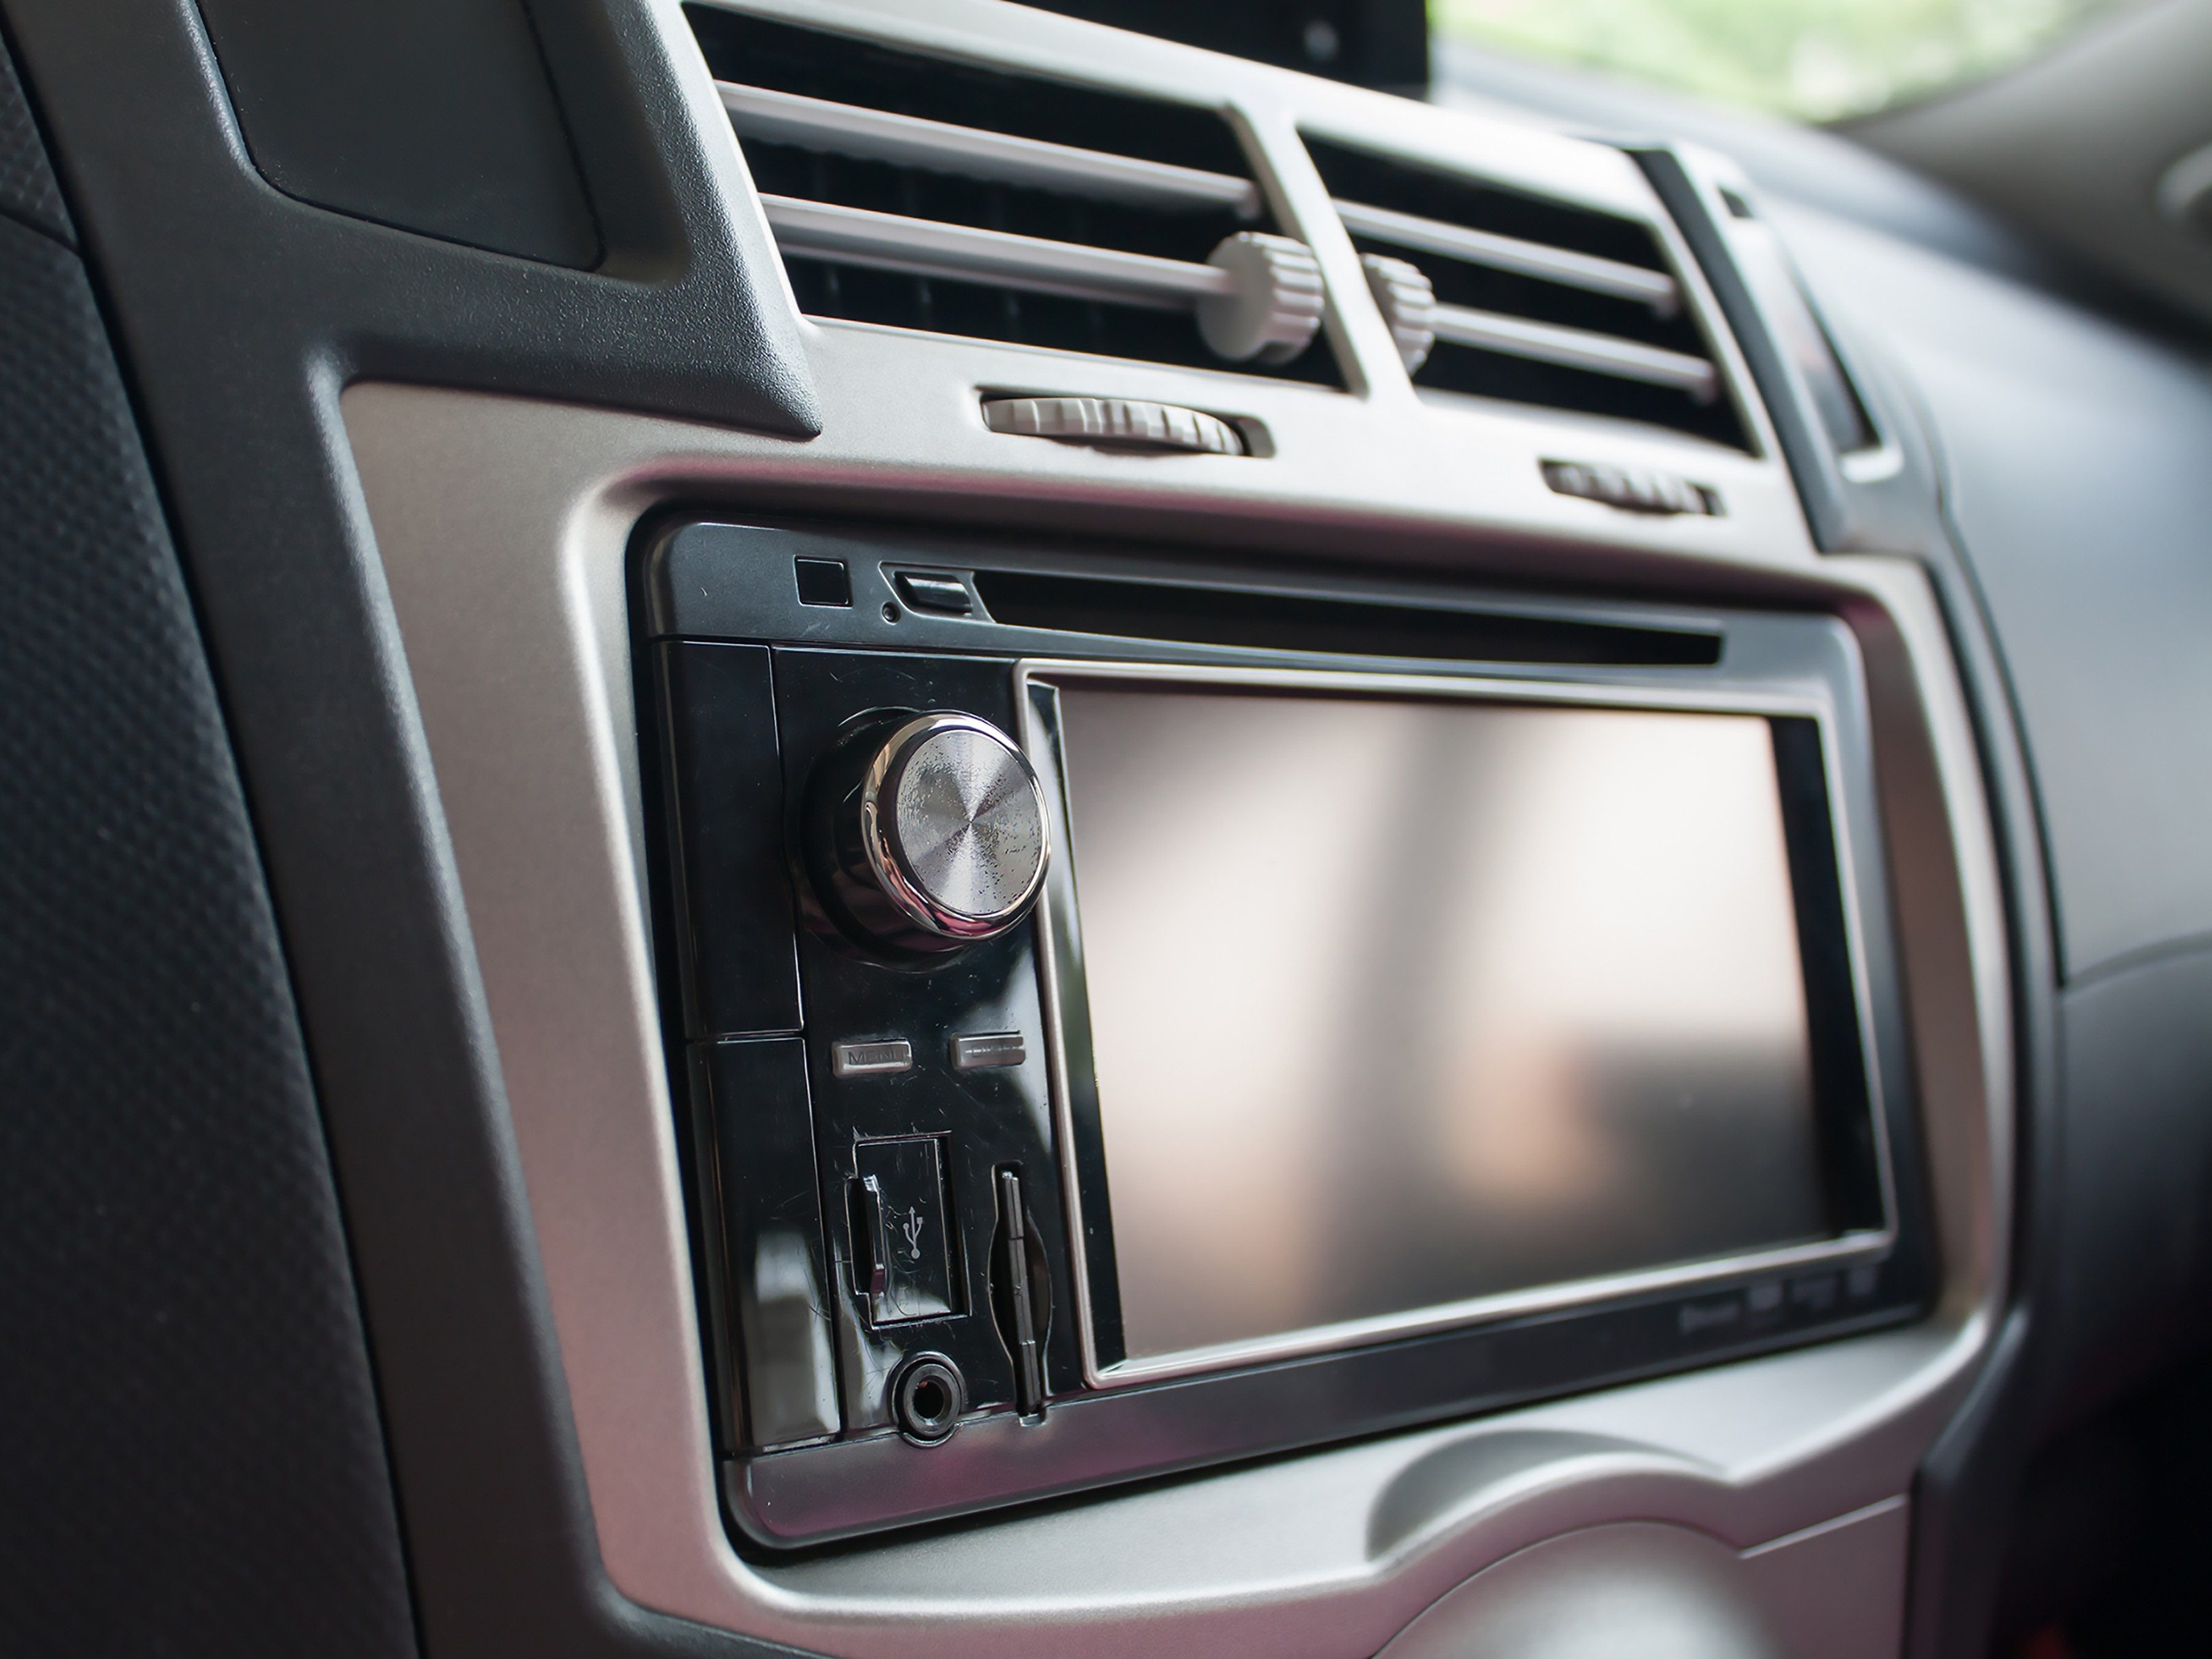 2. Double DIN Car Stereo Systems